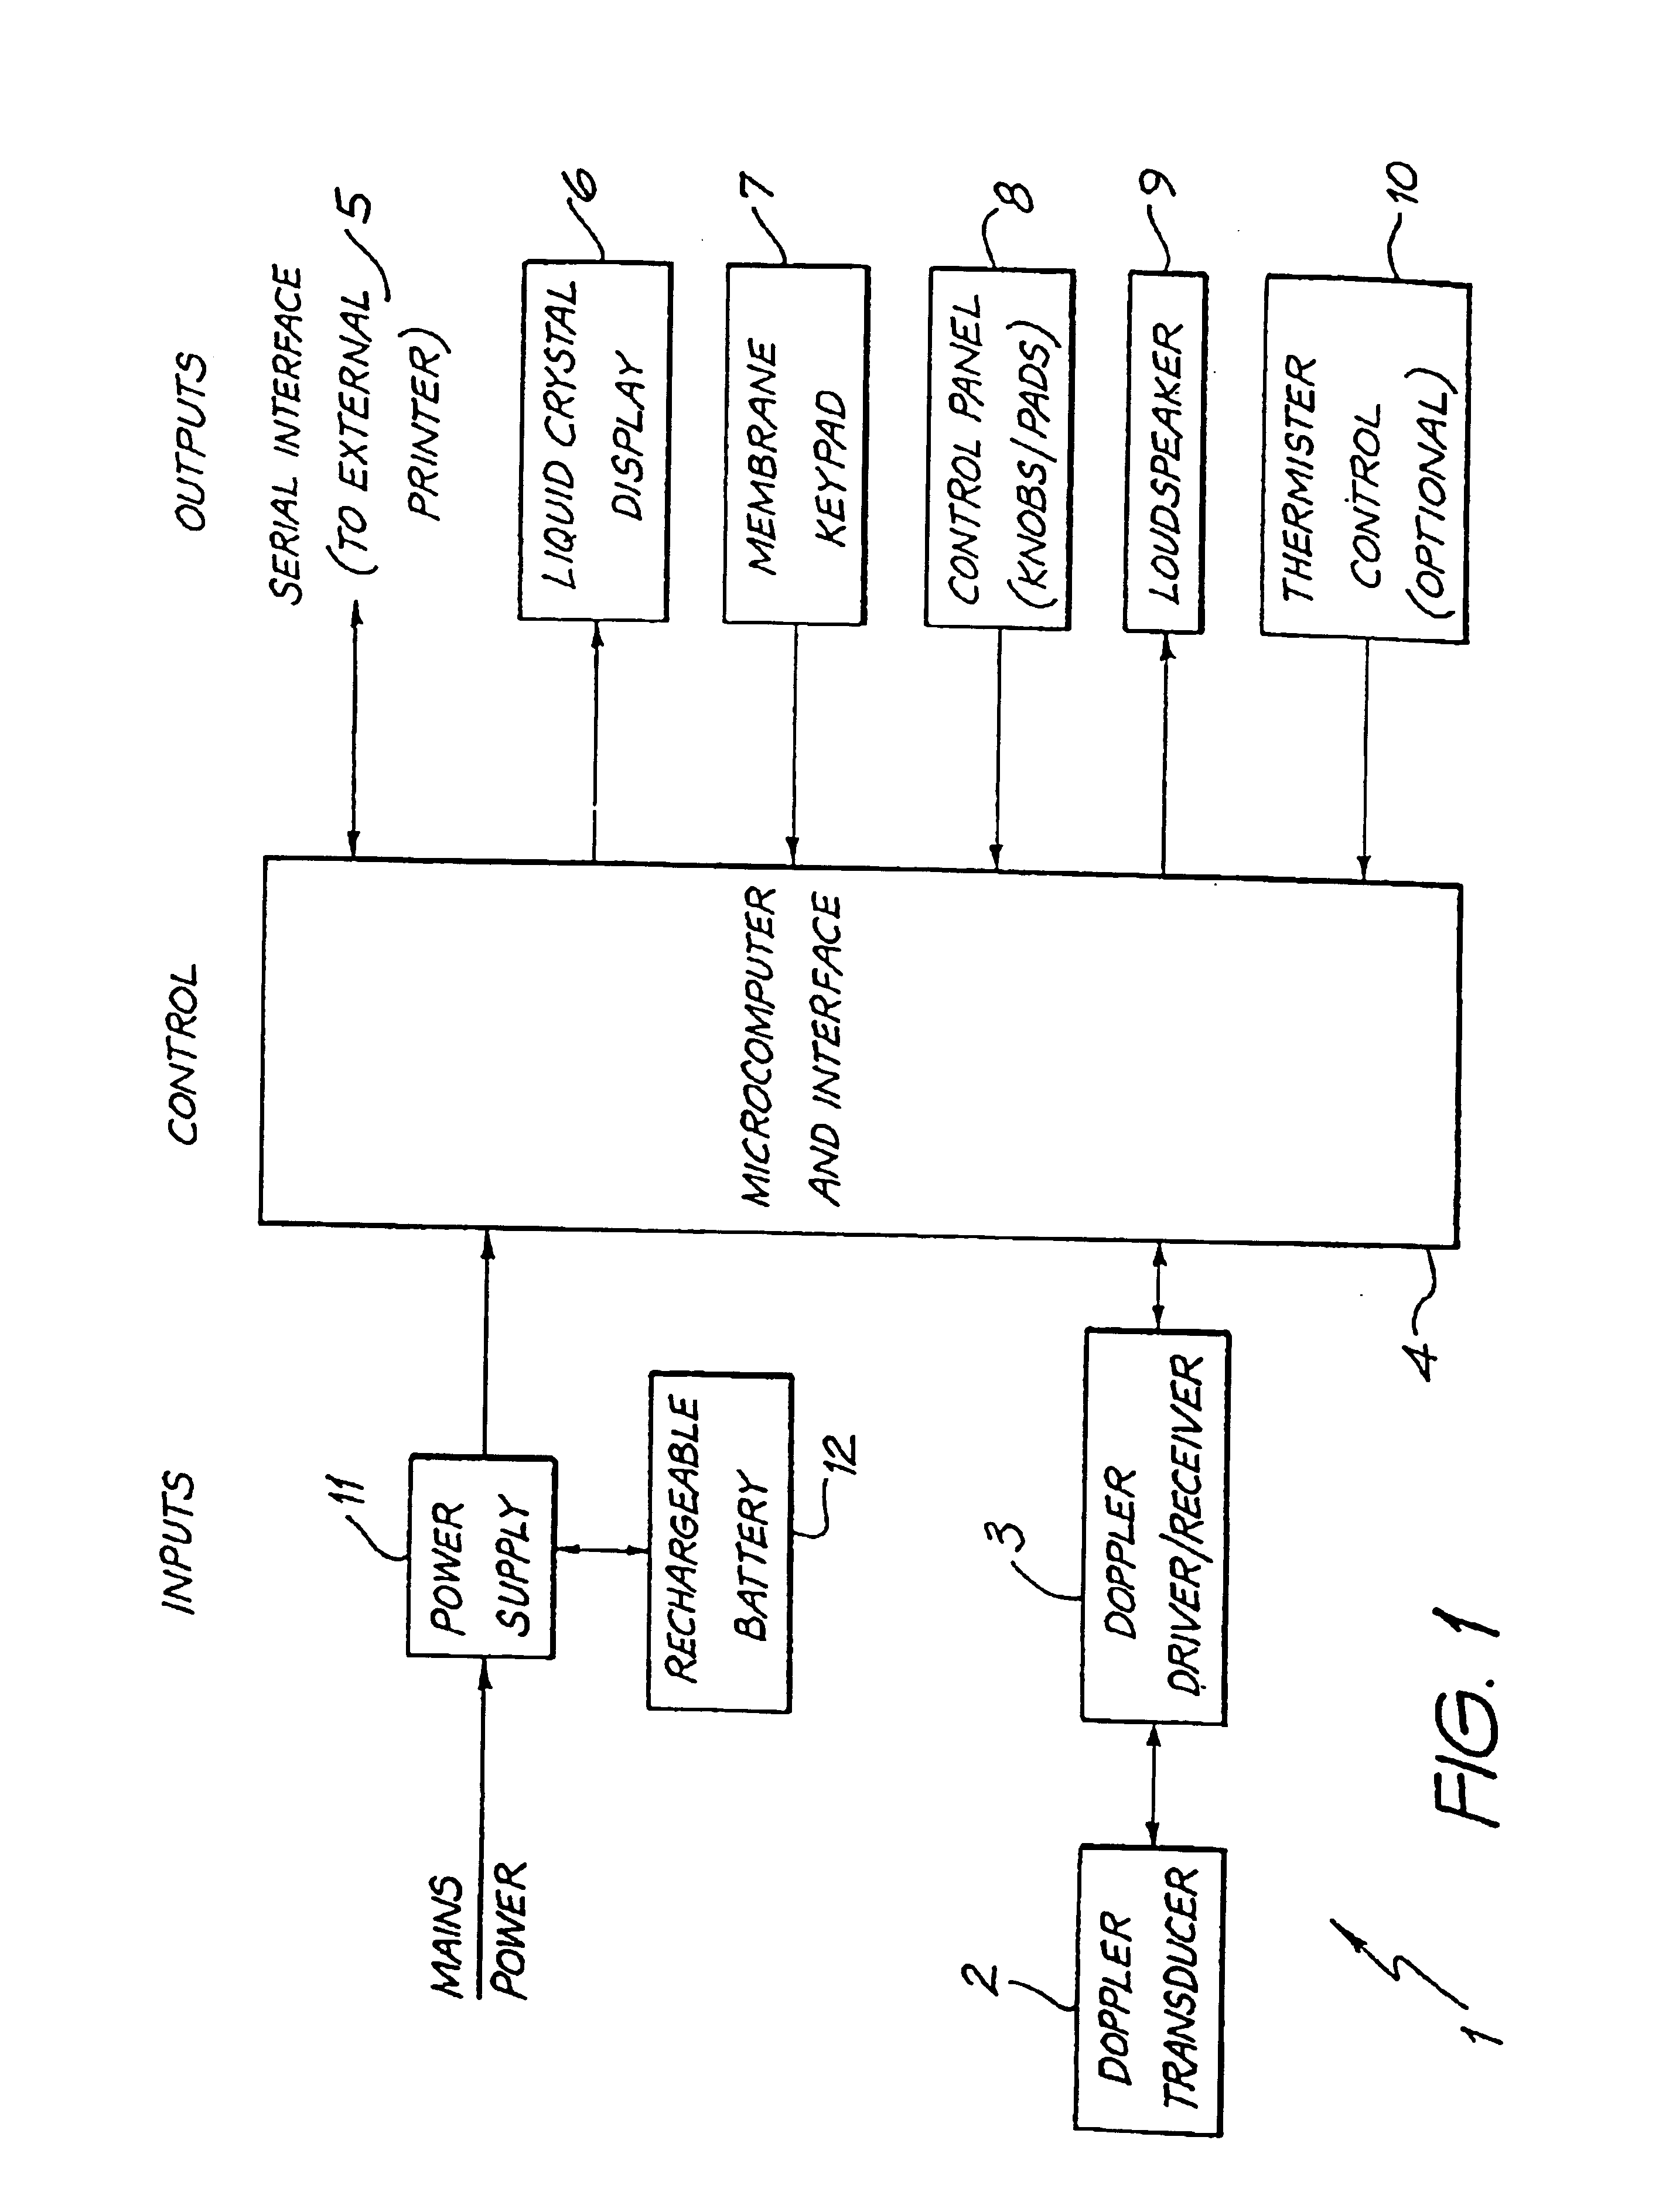 Method and apparatus for monitoring haemodynamic function